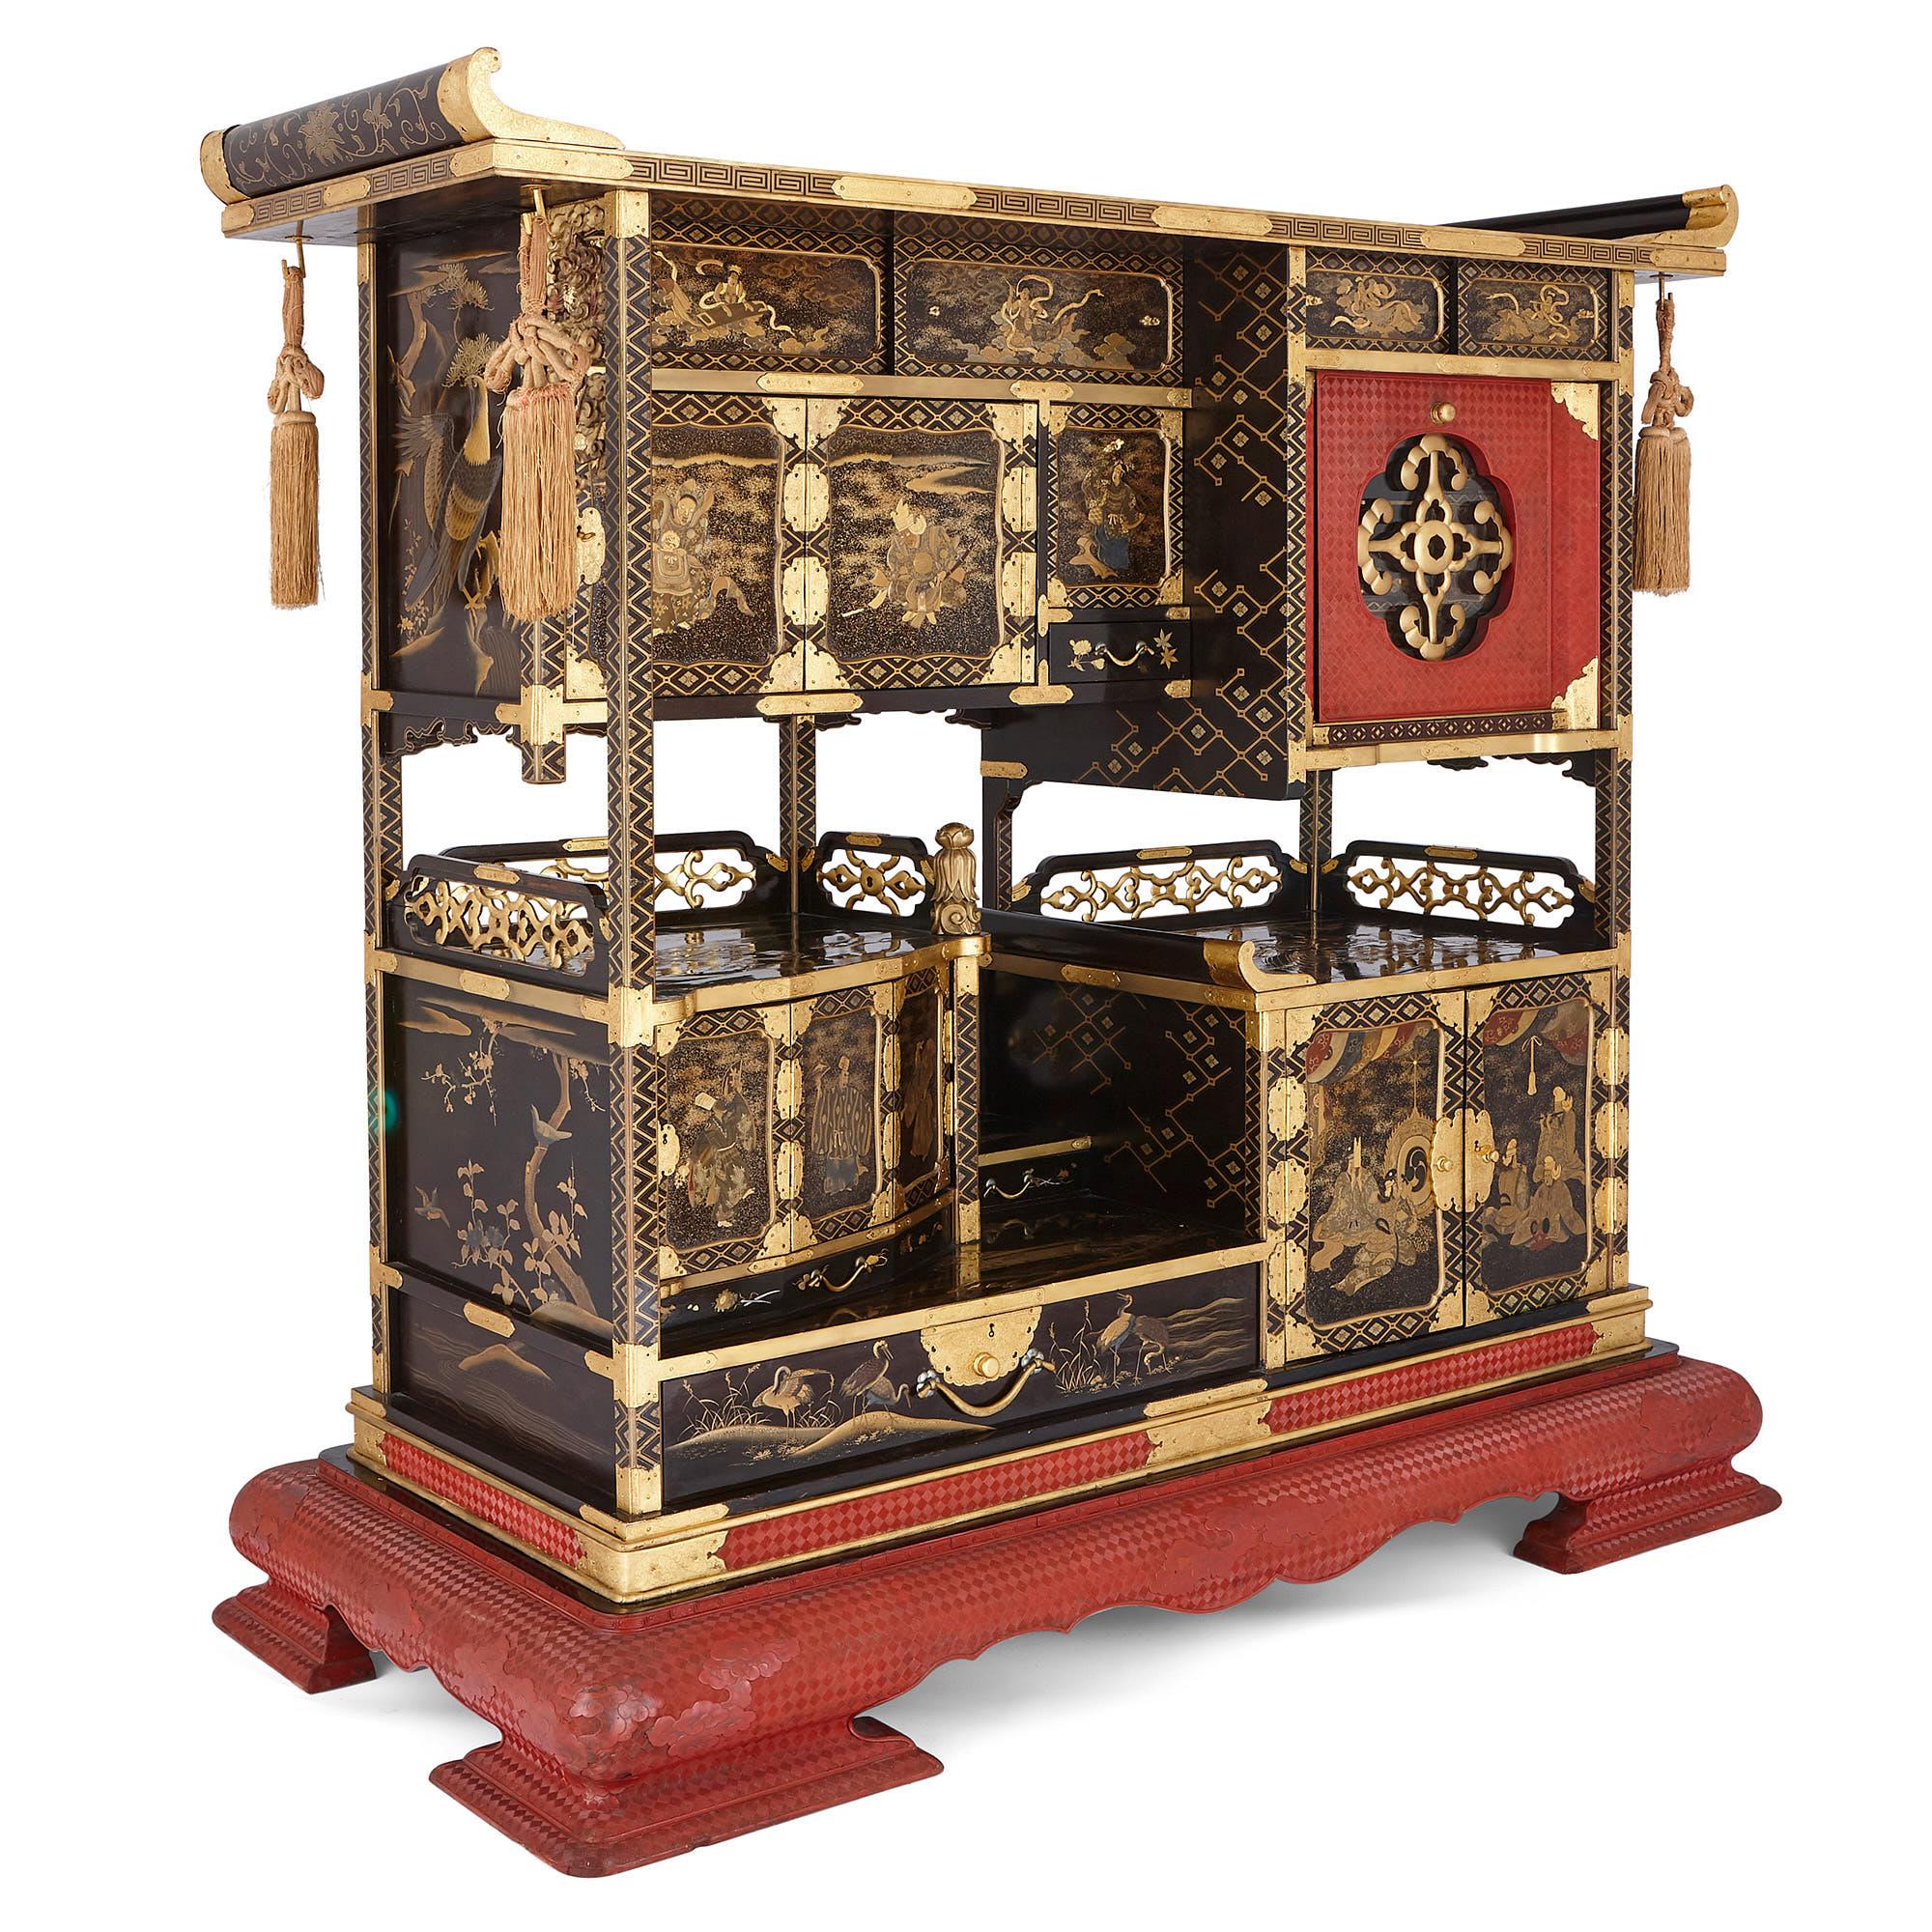 This black lacquer kazaridana (display cabinet) was crafted in the Meiji period in Japan. The body of the cabinet is topped by a roof with upward-curving ends, which faded red tassels hang from. The cabinet is divided in half lengthways by a gap in